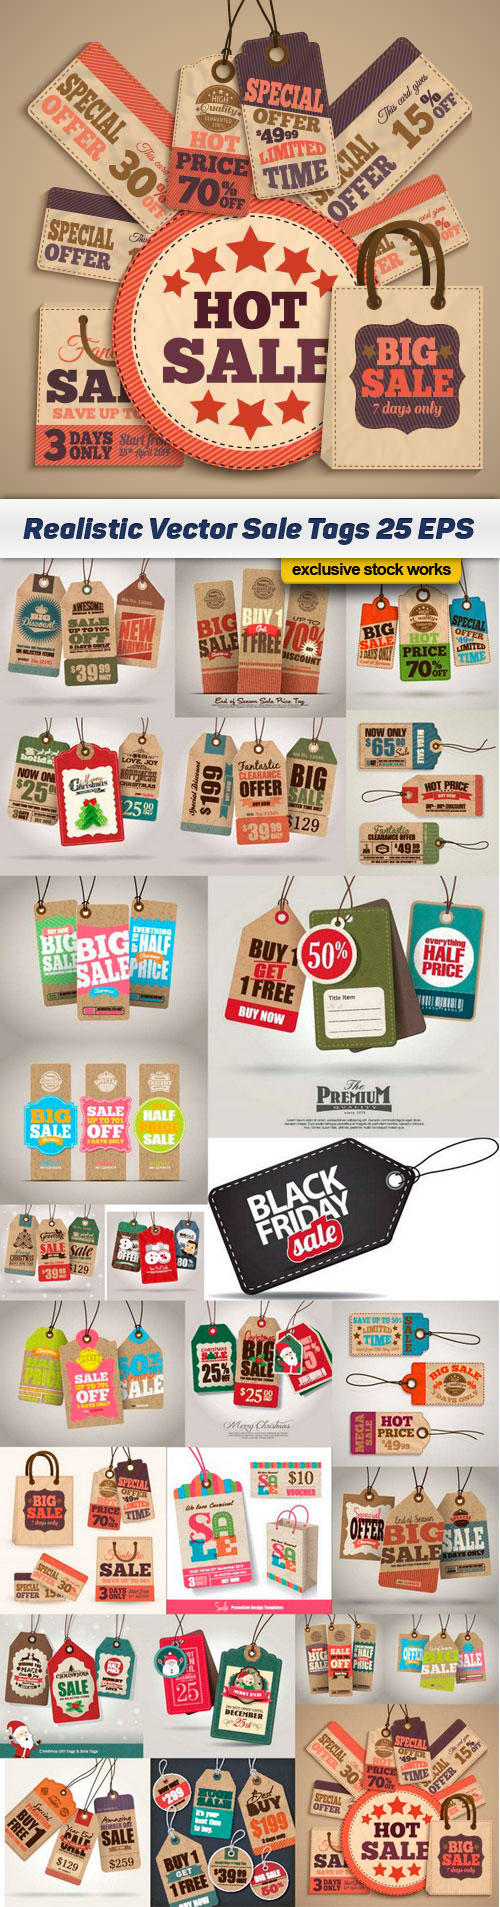 Realistic Vector Sale Tags 6